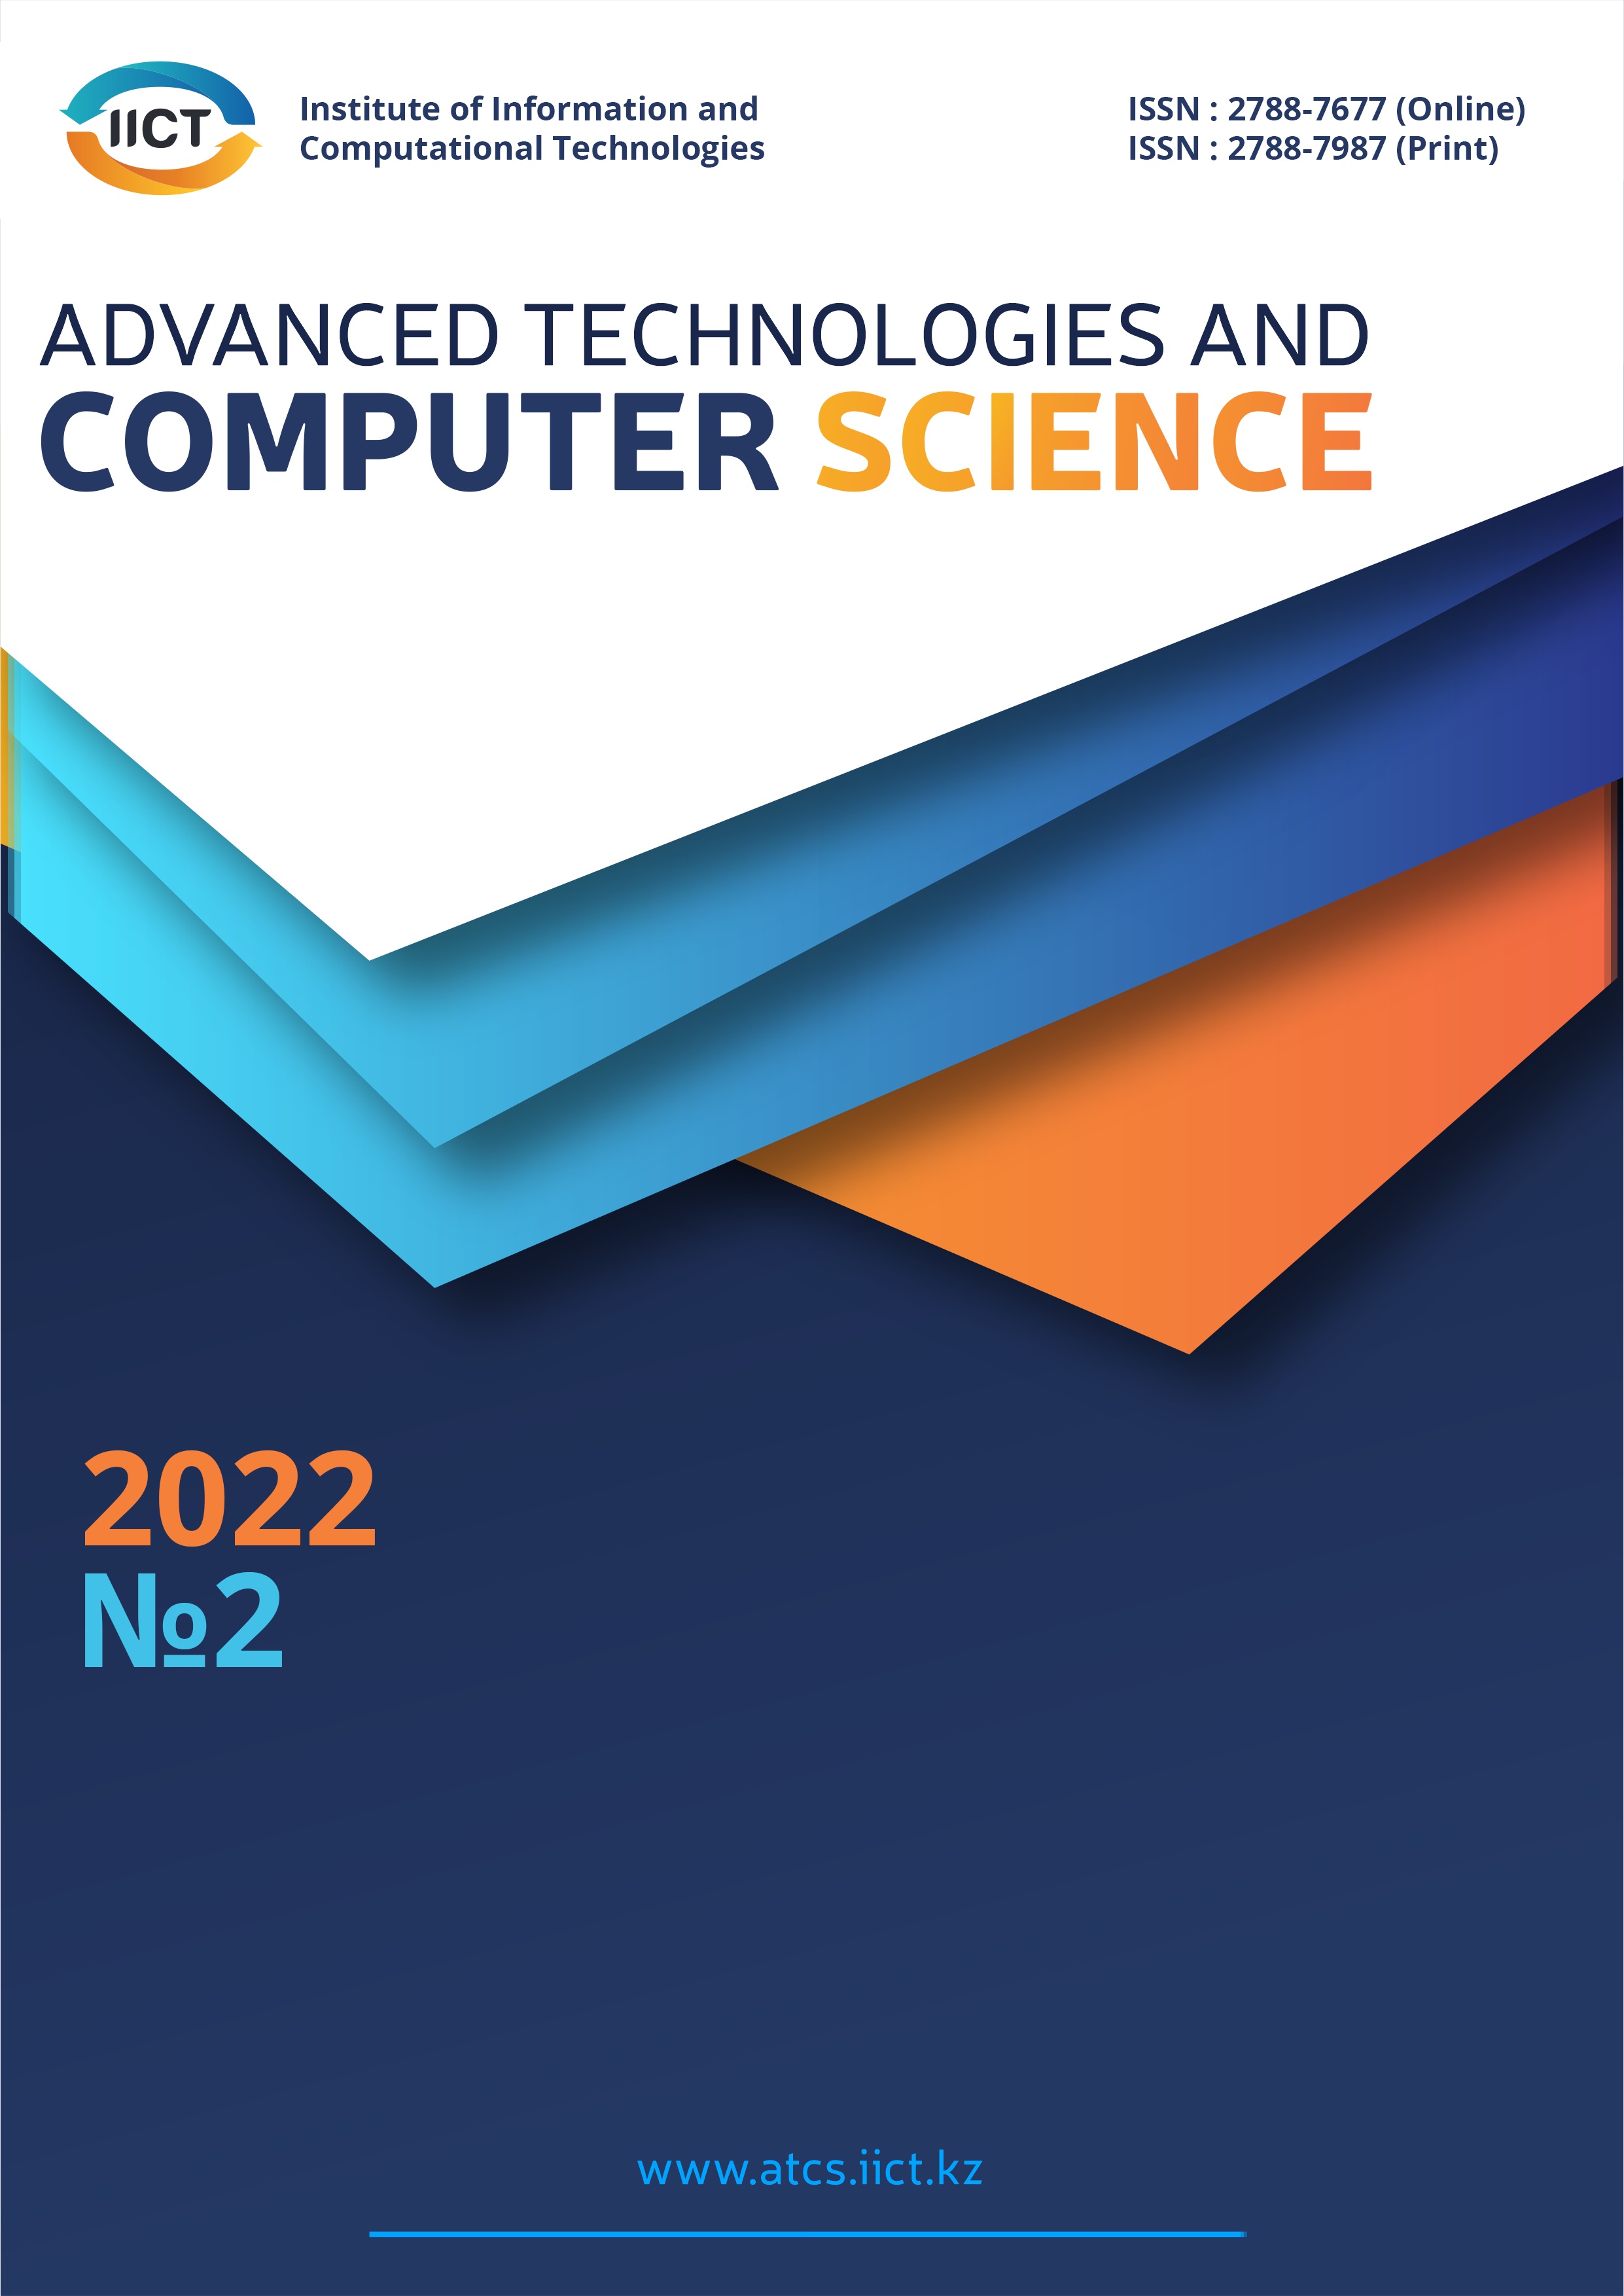 					View Vol. 2 (2022): Advanced technologies and computer science
				